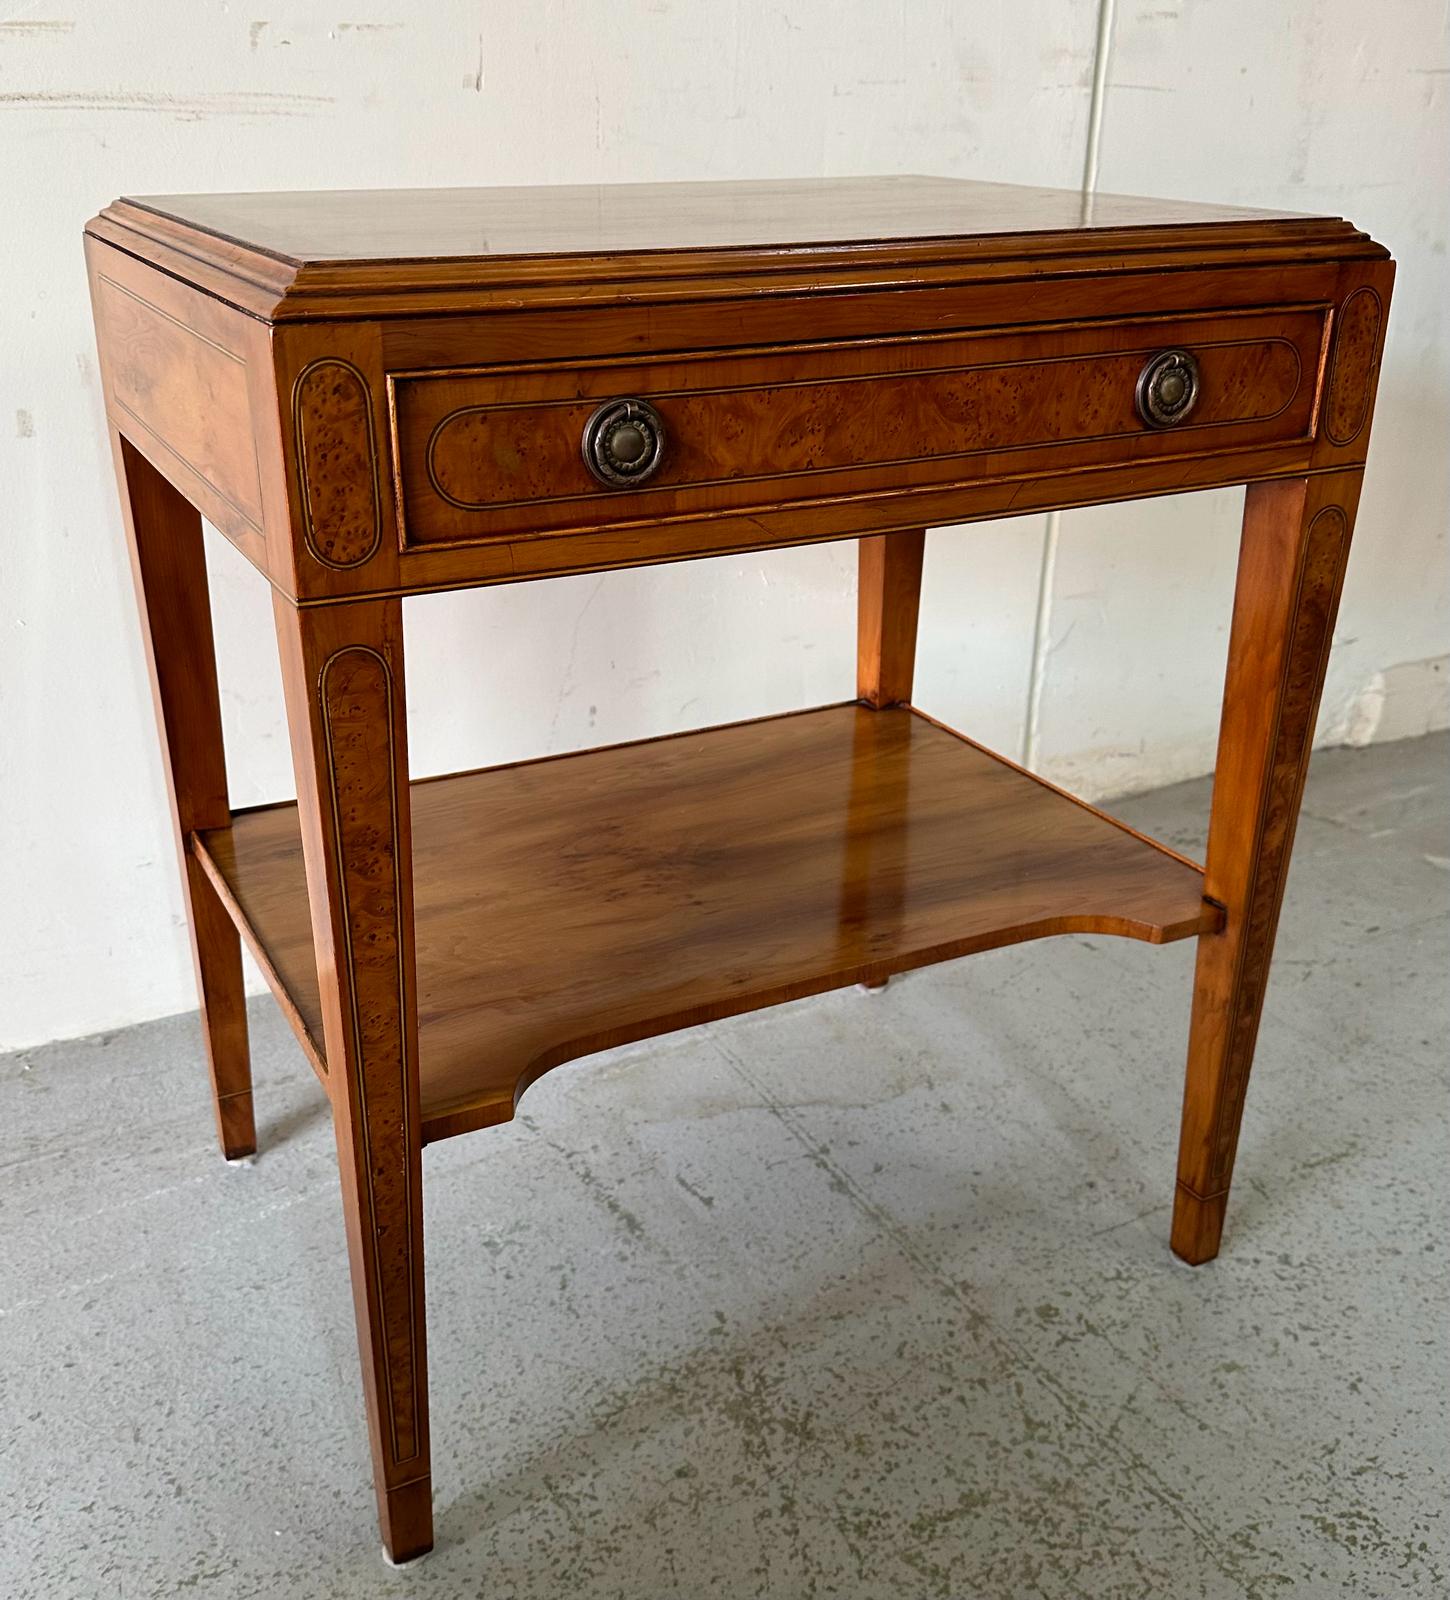 A single drawer side table with string and burr walnut inlay, shelf under and brass handles (H70cm - Image 4 of 5